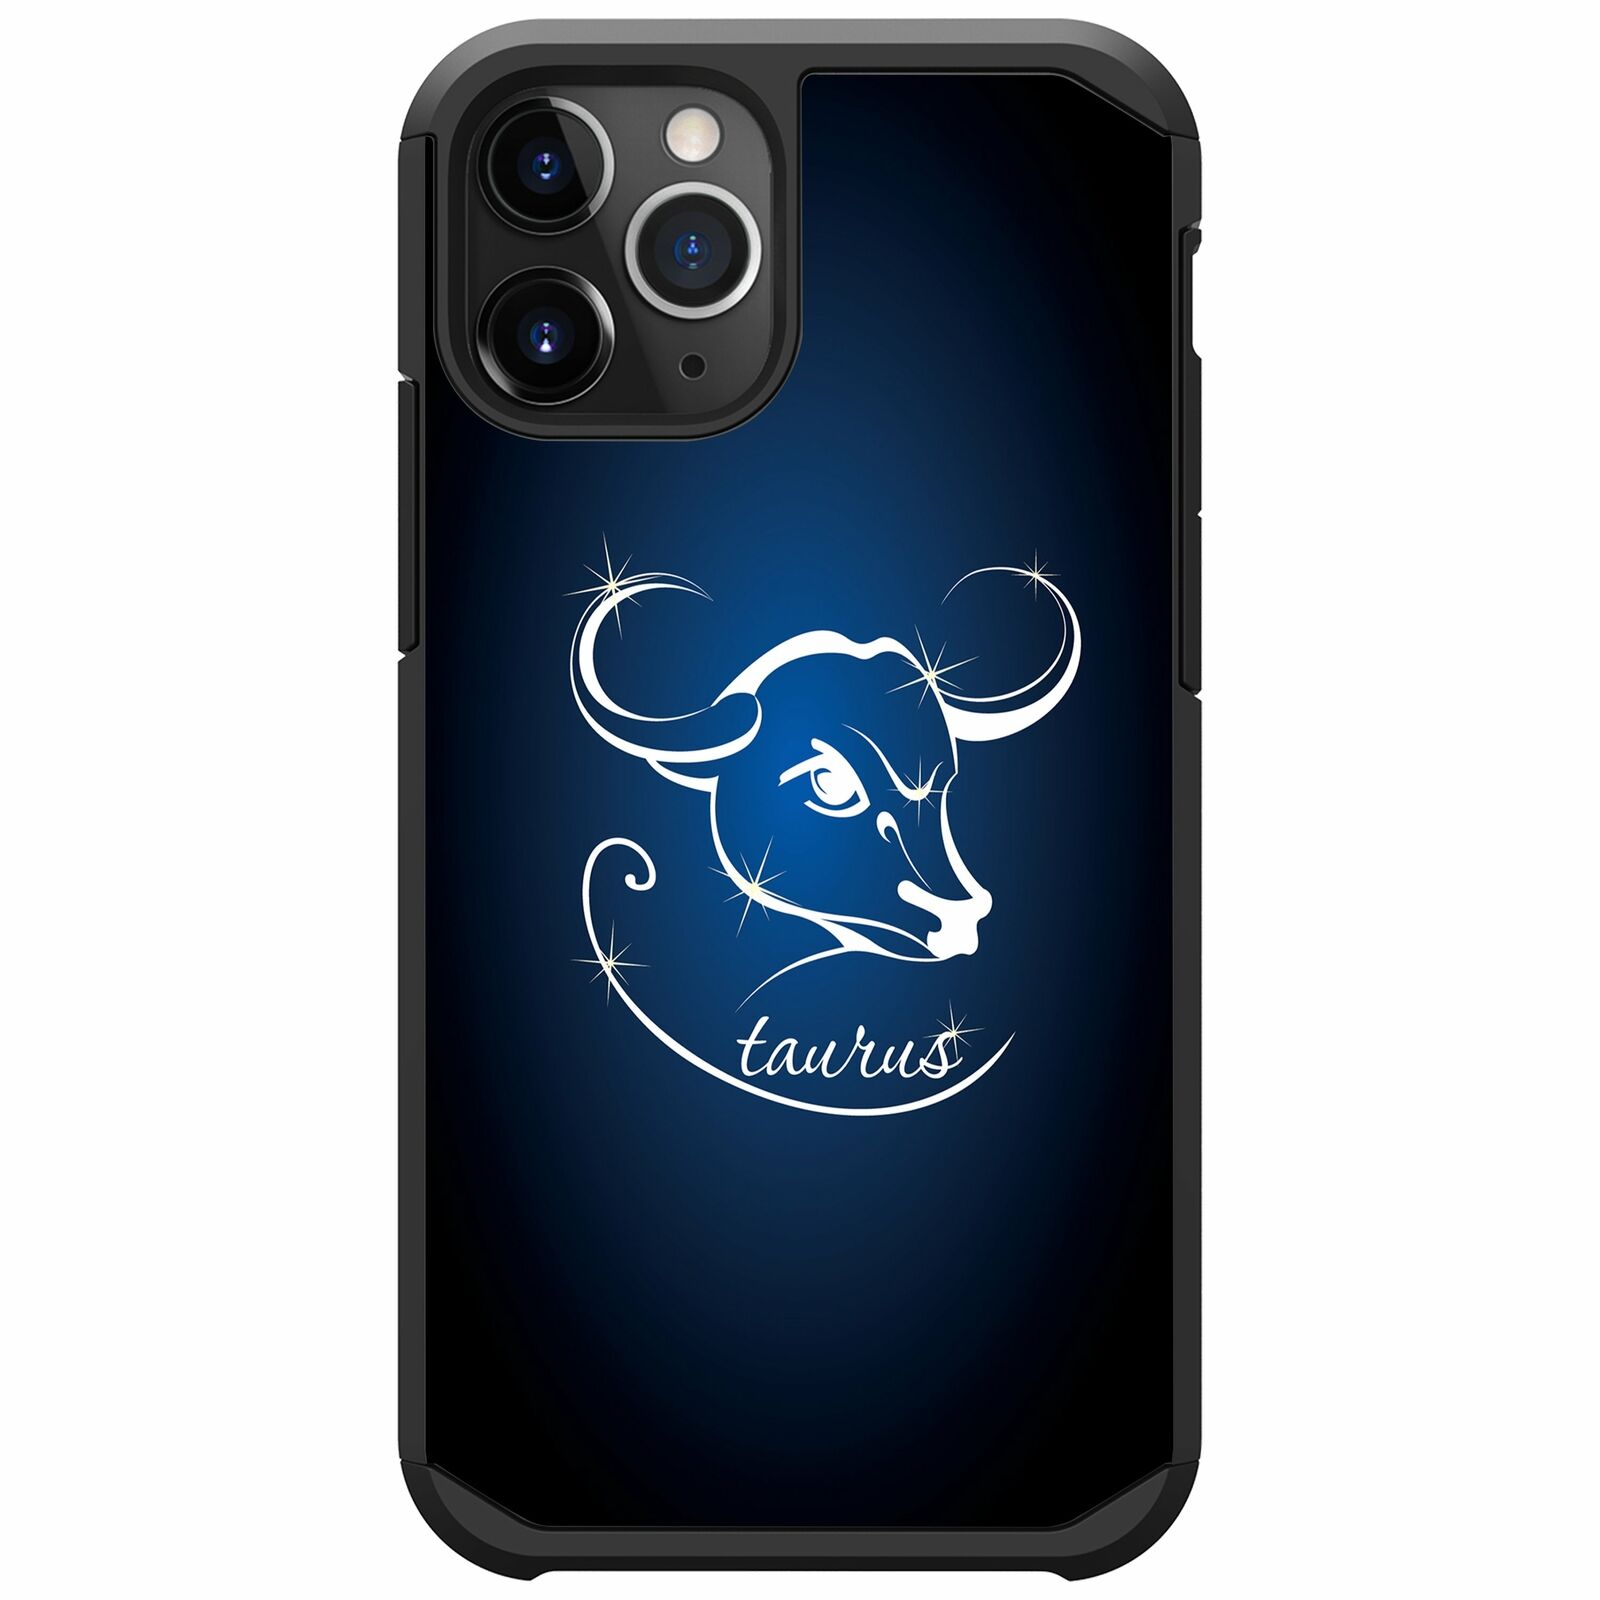 For Apple iPhone 11 PRO MAX (6.5) Slim Protective Dual Layer Case Zodiac iPhone Cases AtlasCase Taurus 